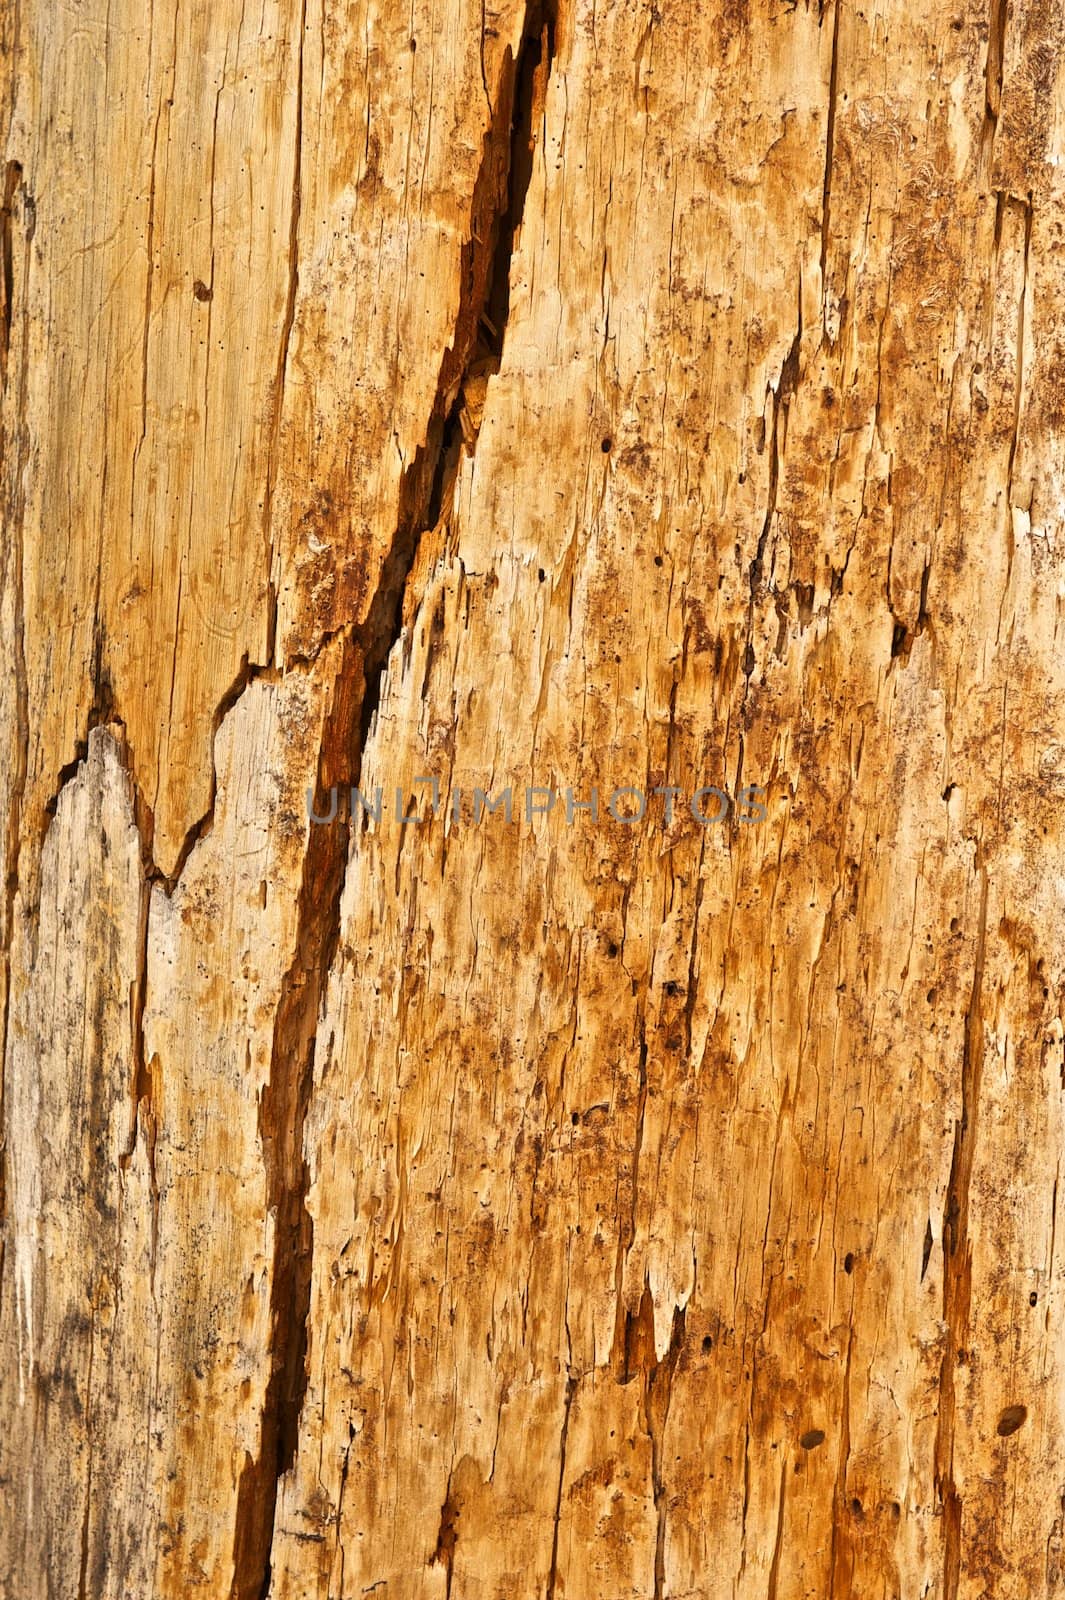 Tree Trunk Surface With Cracks by pixelsnap